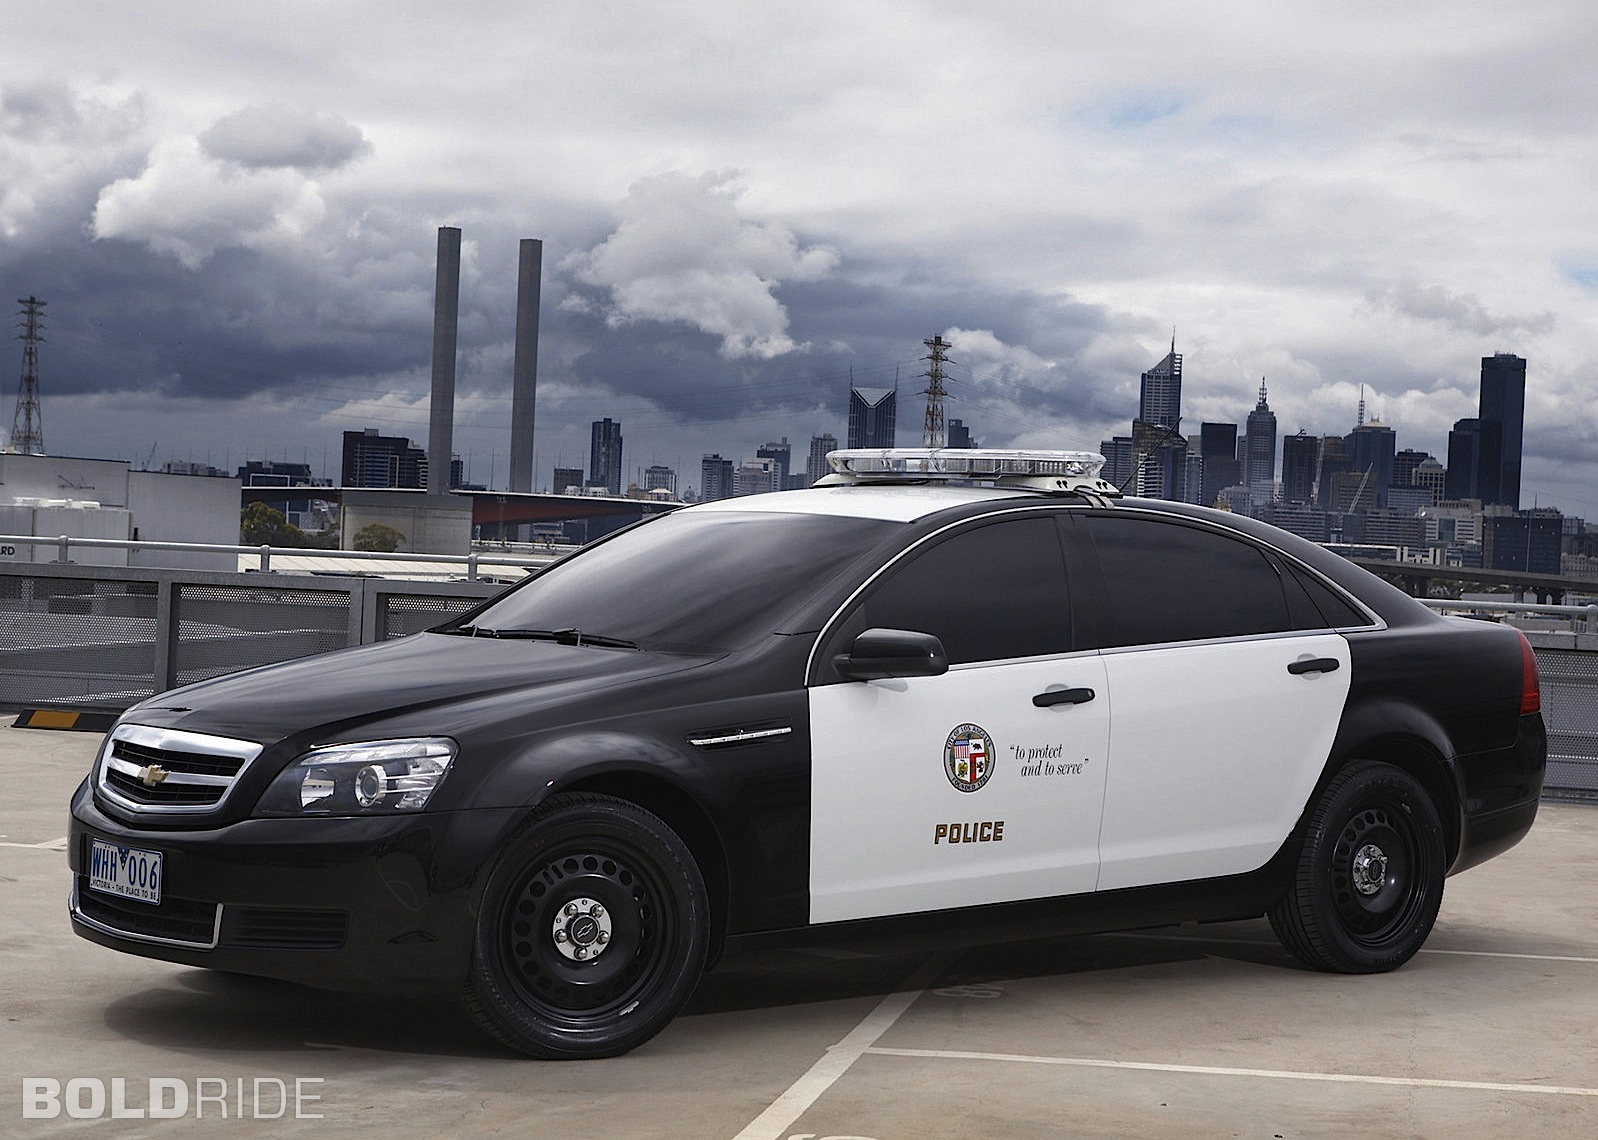 2012, Chevrolet, Caprice, Police, Muscle, Fs Wallpaper